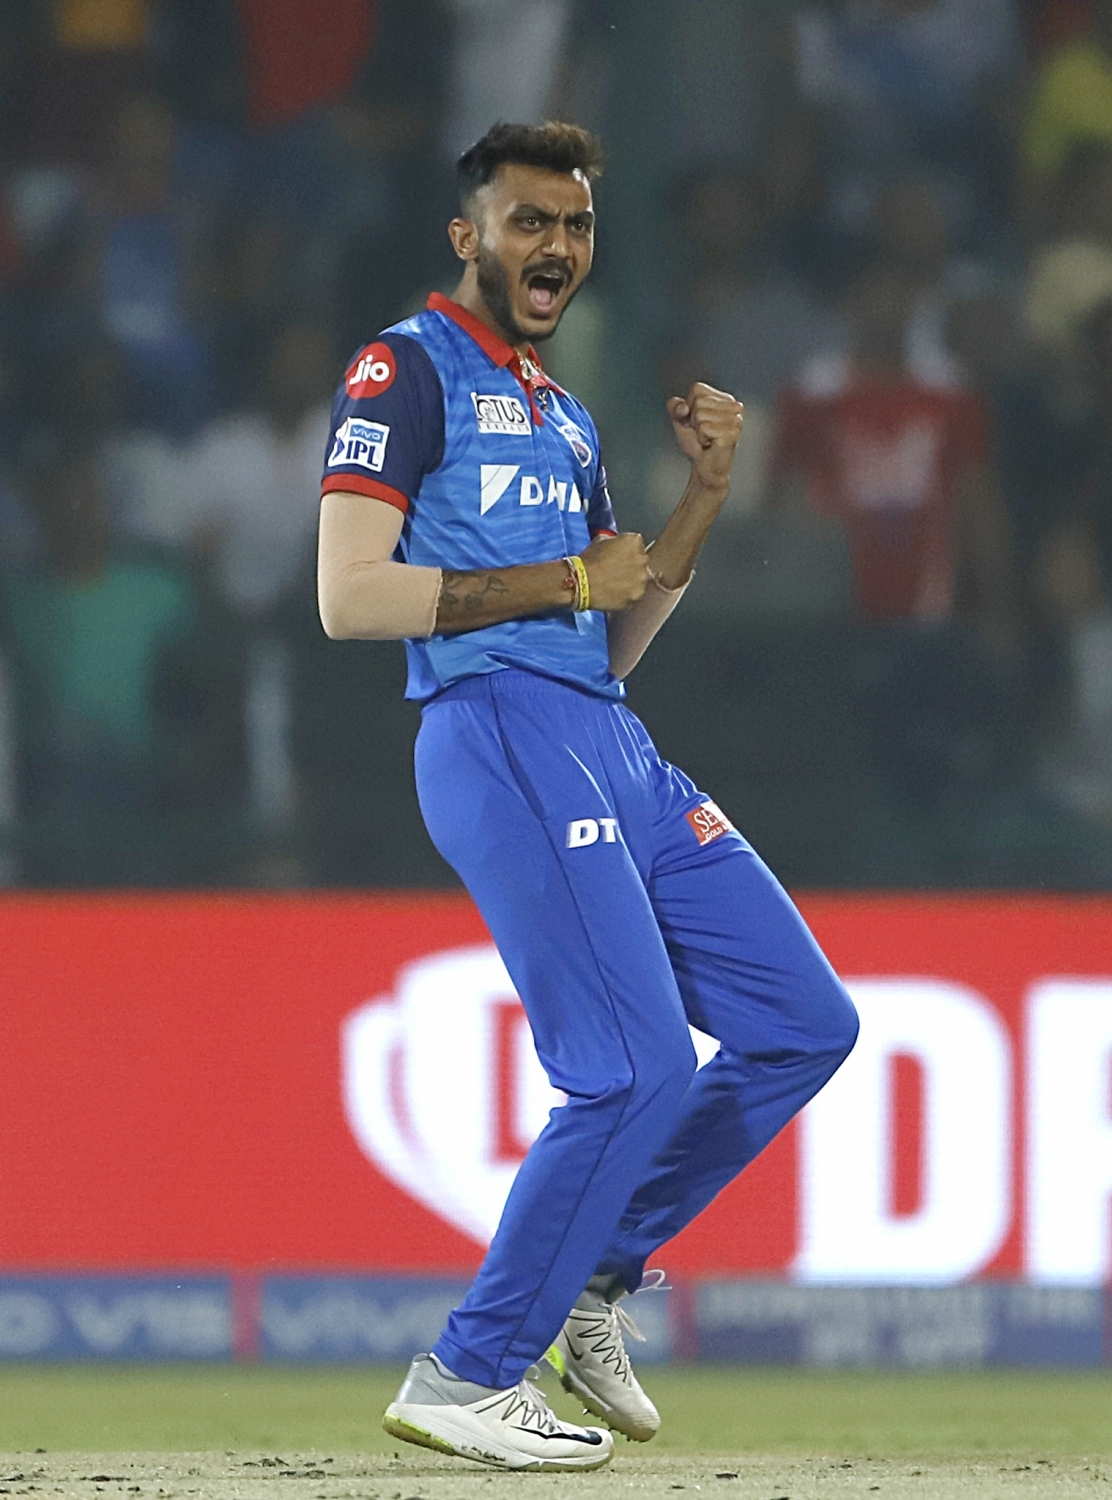 IPL 2021: Delhi Capitals announce short-term Covid-19 replacement for Axar Patel and injured Shreyas Iyer